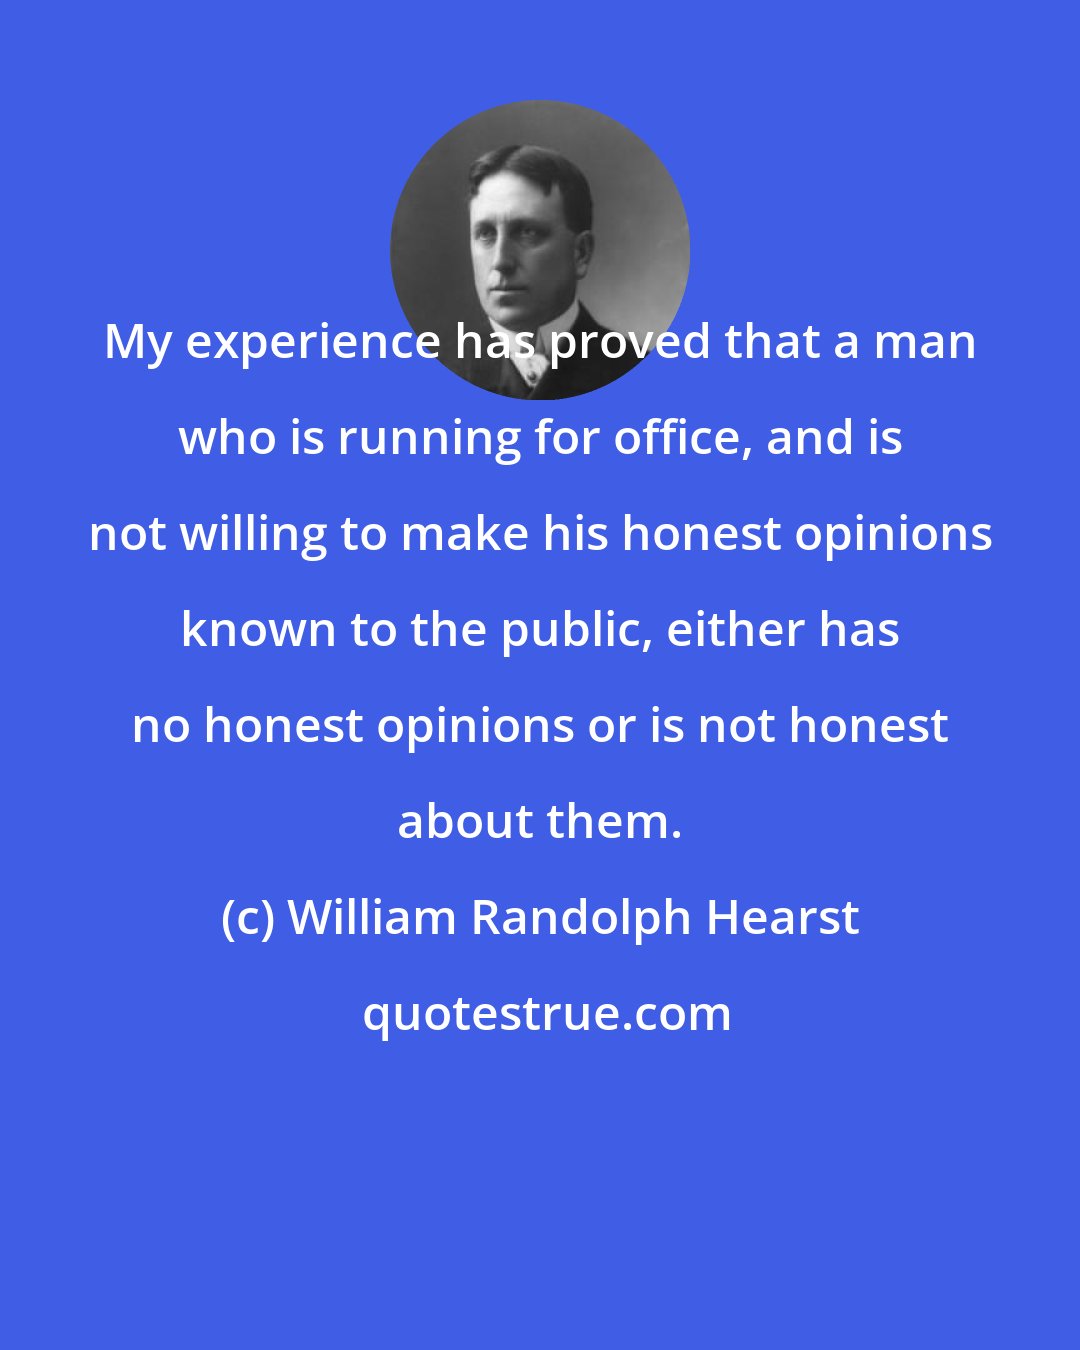 William Randolph Hearst: My experience has proved that a man who is running for office, and is not willing to make his honest opinions known to the public, either has no honest opinions or is not honest about them.